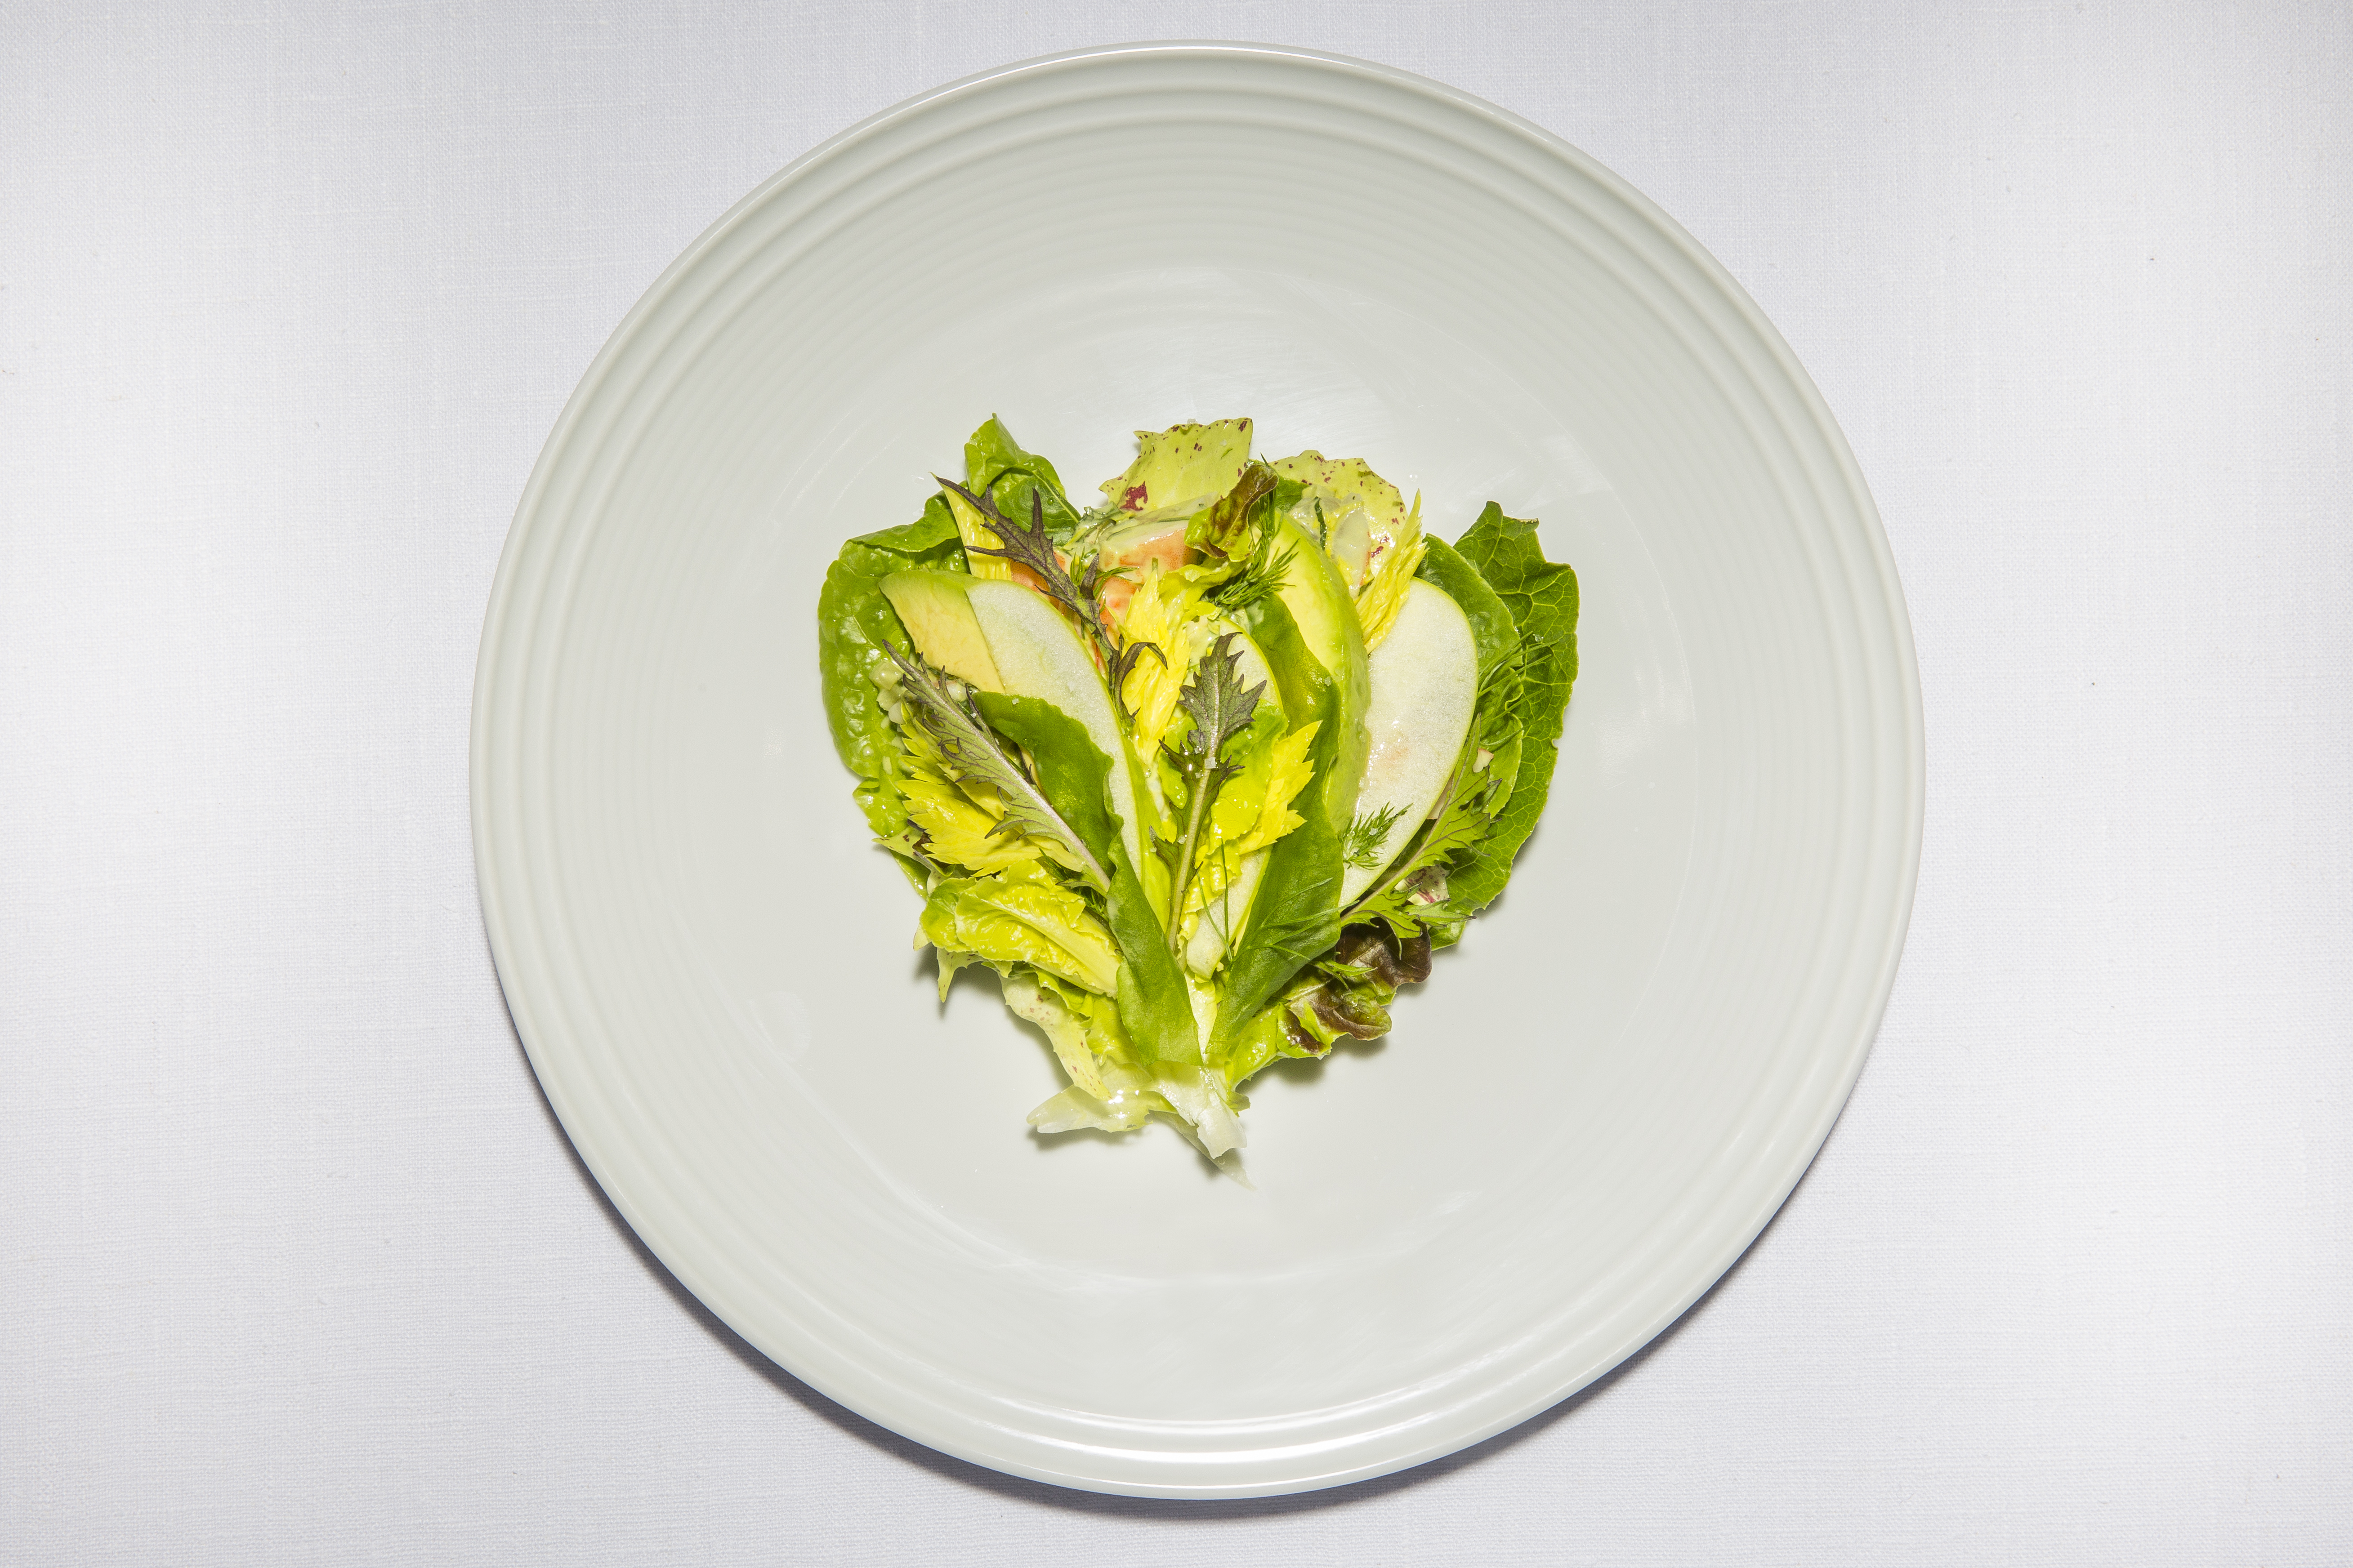 Prawn salad with sorrel and lettuces-photo by David Williams